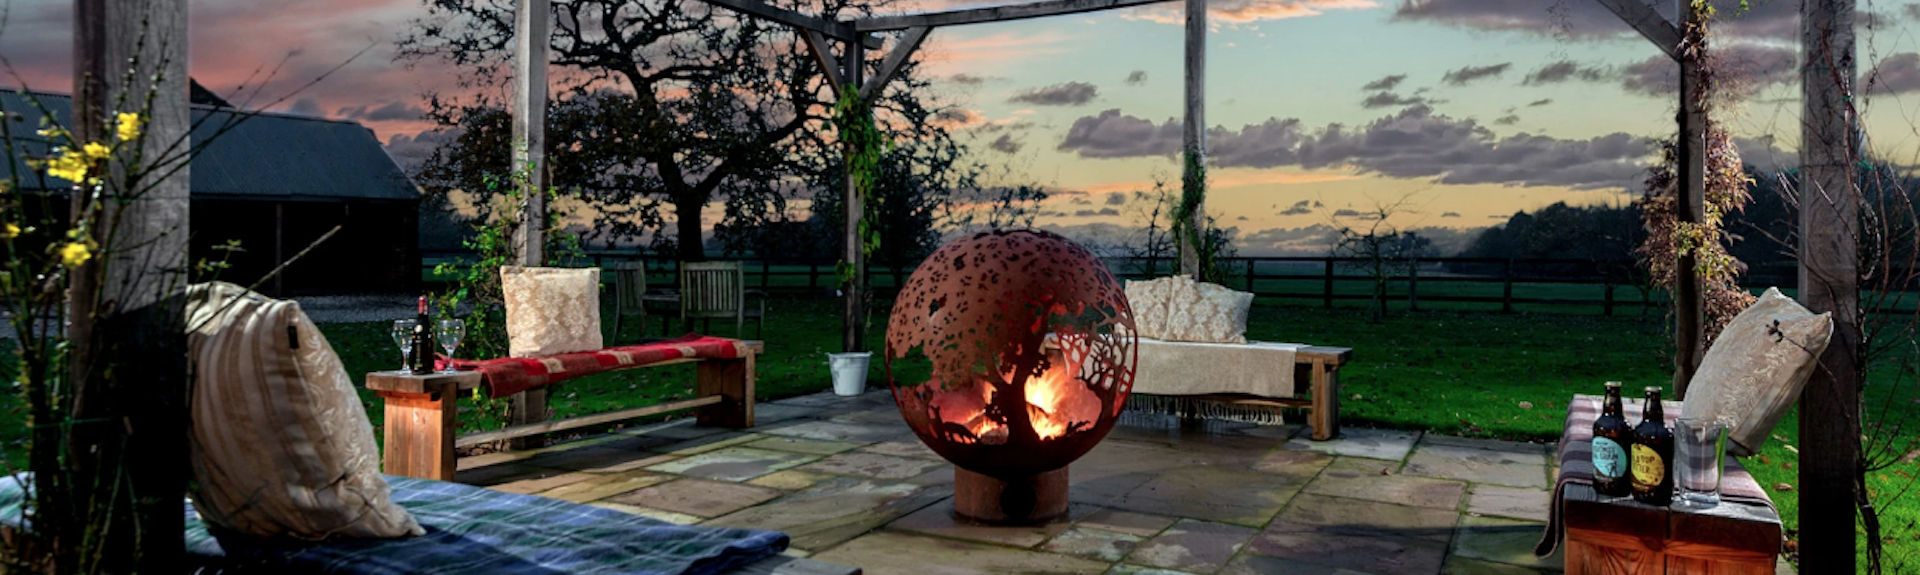 Holiday cottages in the Yorkshire Wolds: The terrace at Broadgate Farm in the sunset - A Luxury Holiday Cottage.